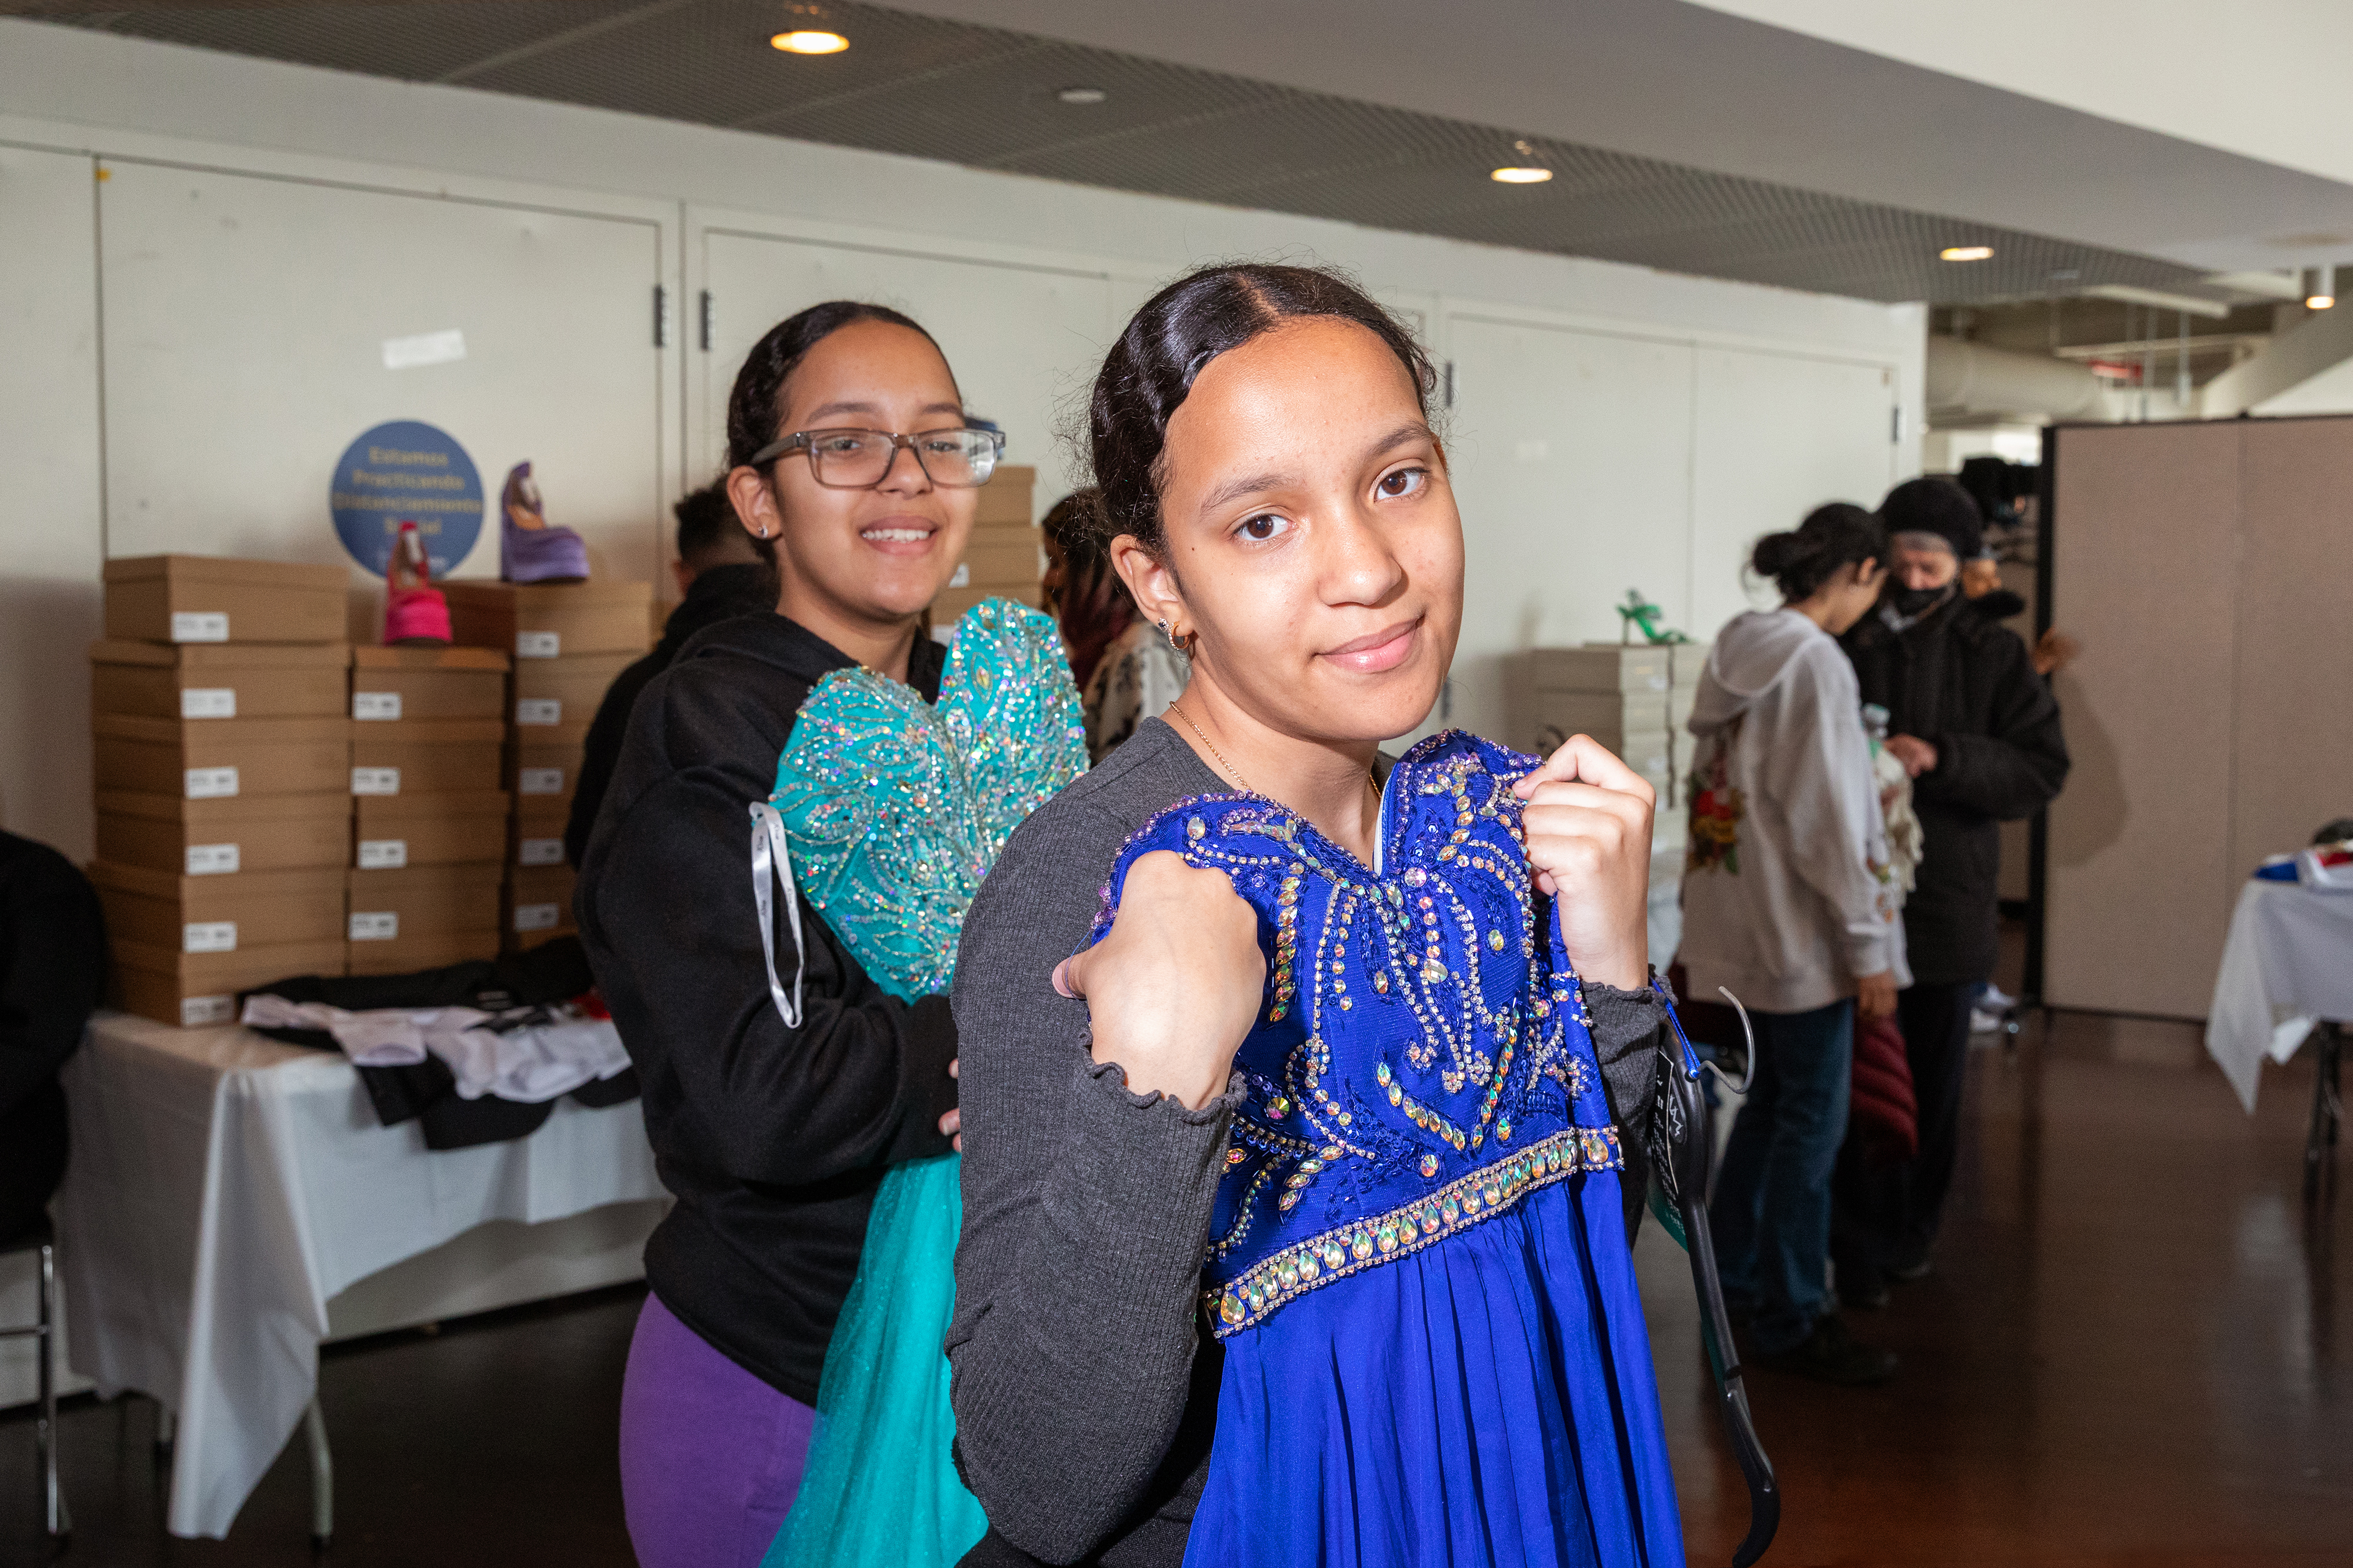 Thirteen-year-old twins Crizzely and Crismayline holding and admiring prom dresses they selected at the Operation Prom clothing giveaway event